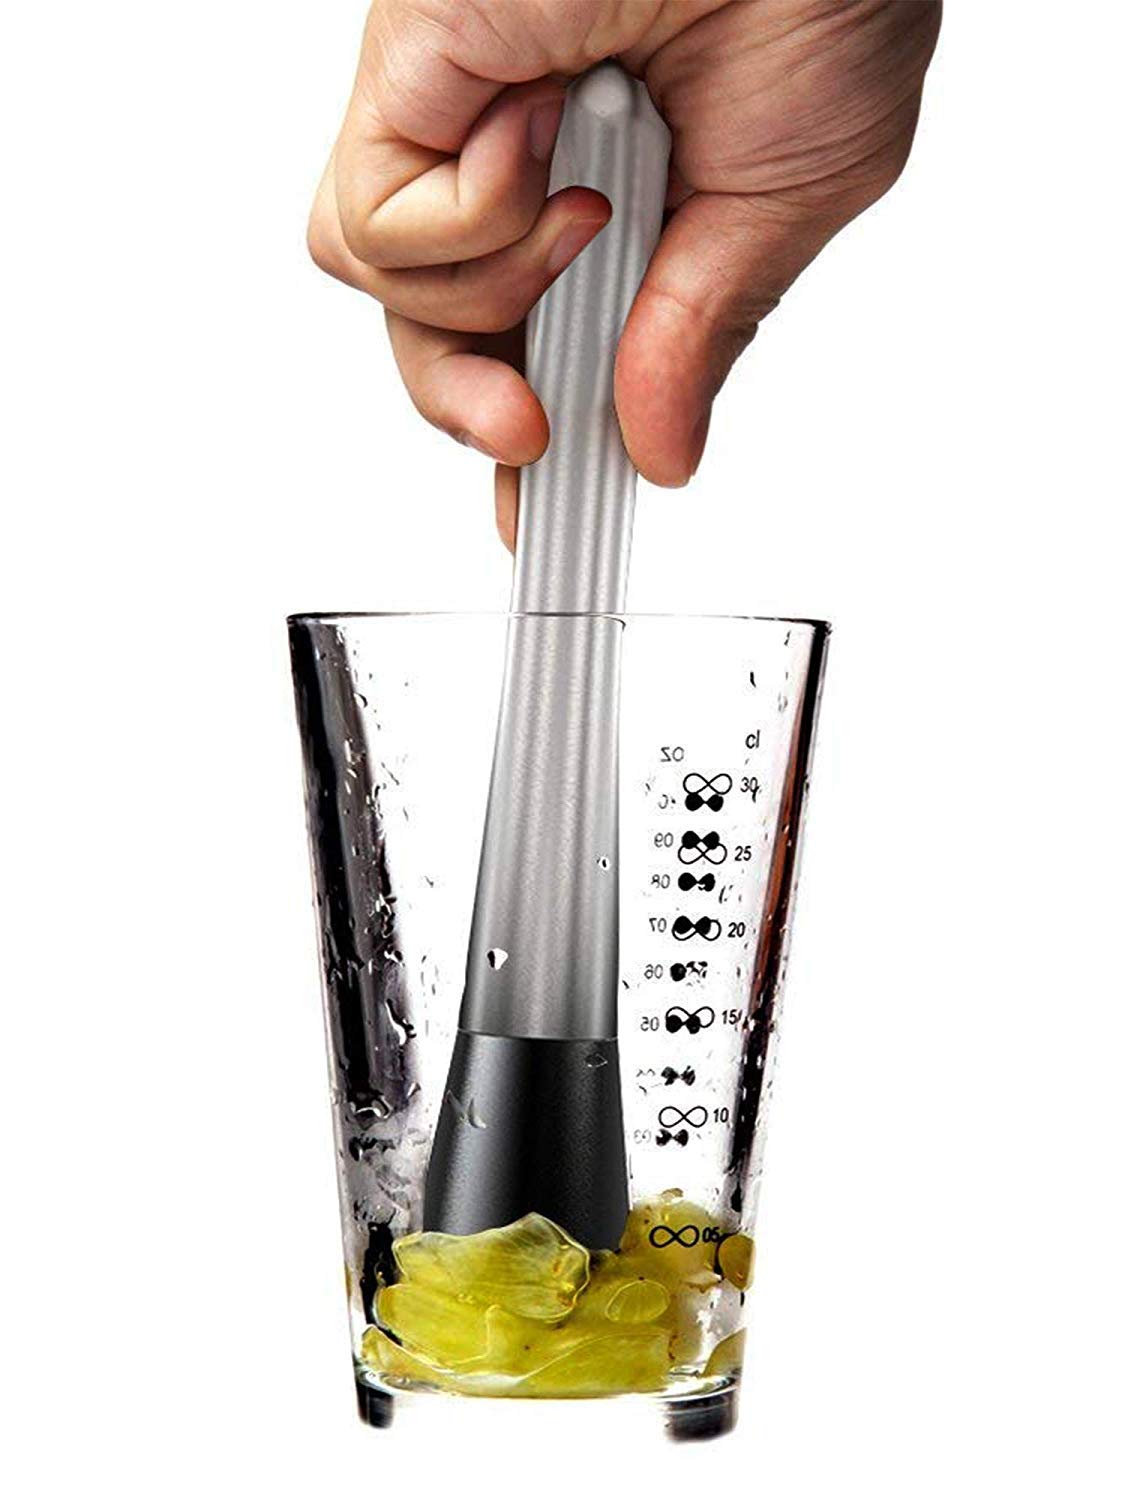 https://barobjects.com/wp-content/uploads/2022/10/Barobjects-cocktail-muddler.jpg